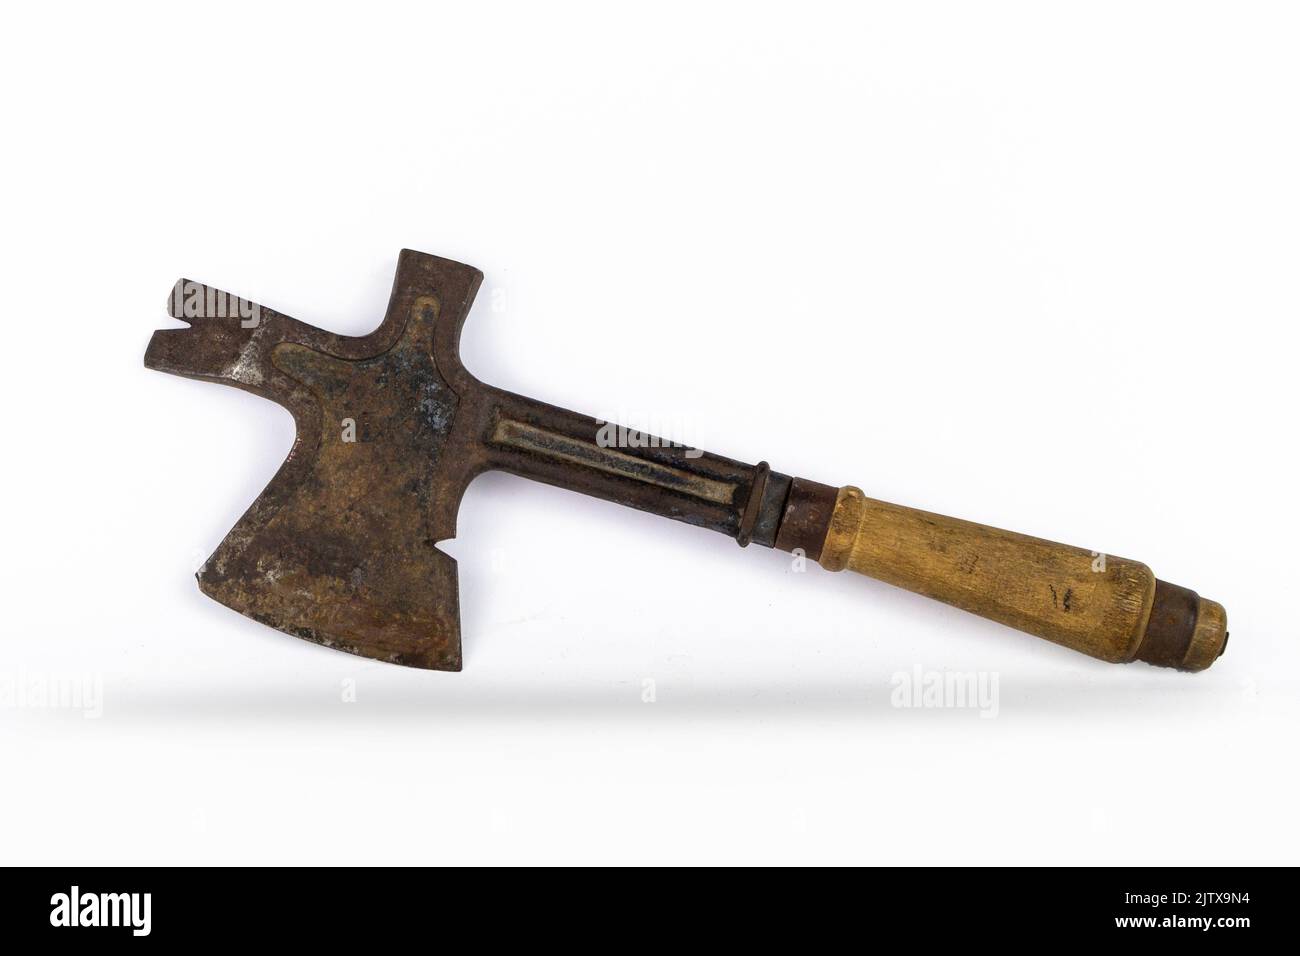 Vintage rusted axe isolated on white background. Stock Photo